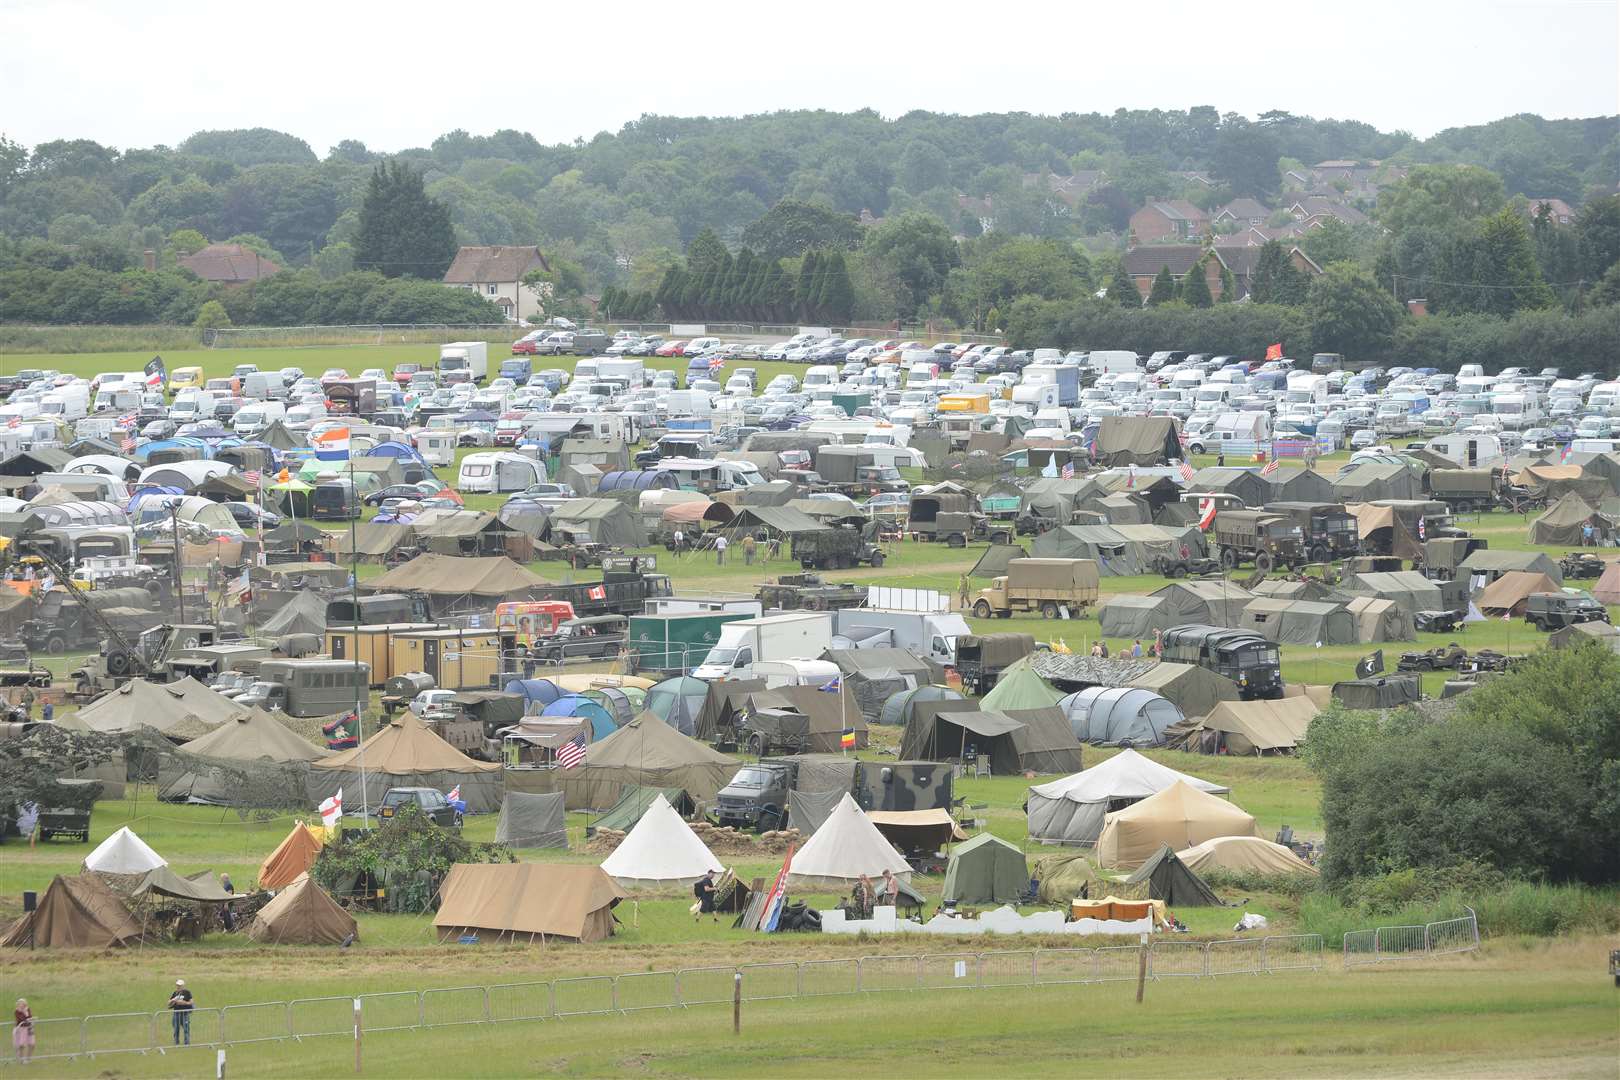 The War and Peace Revival, at Folkestone Racecourse this year.